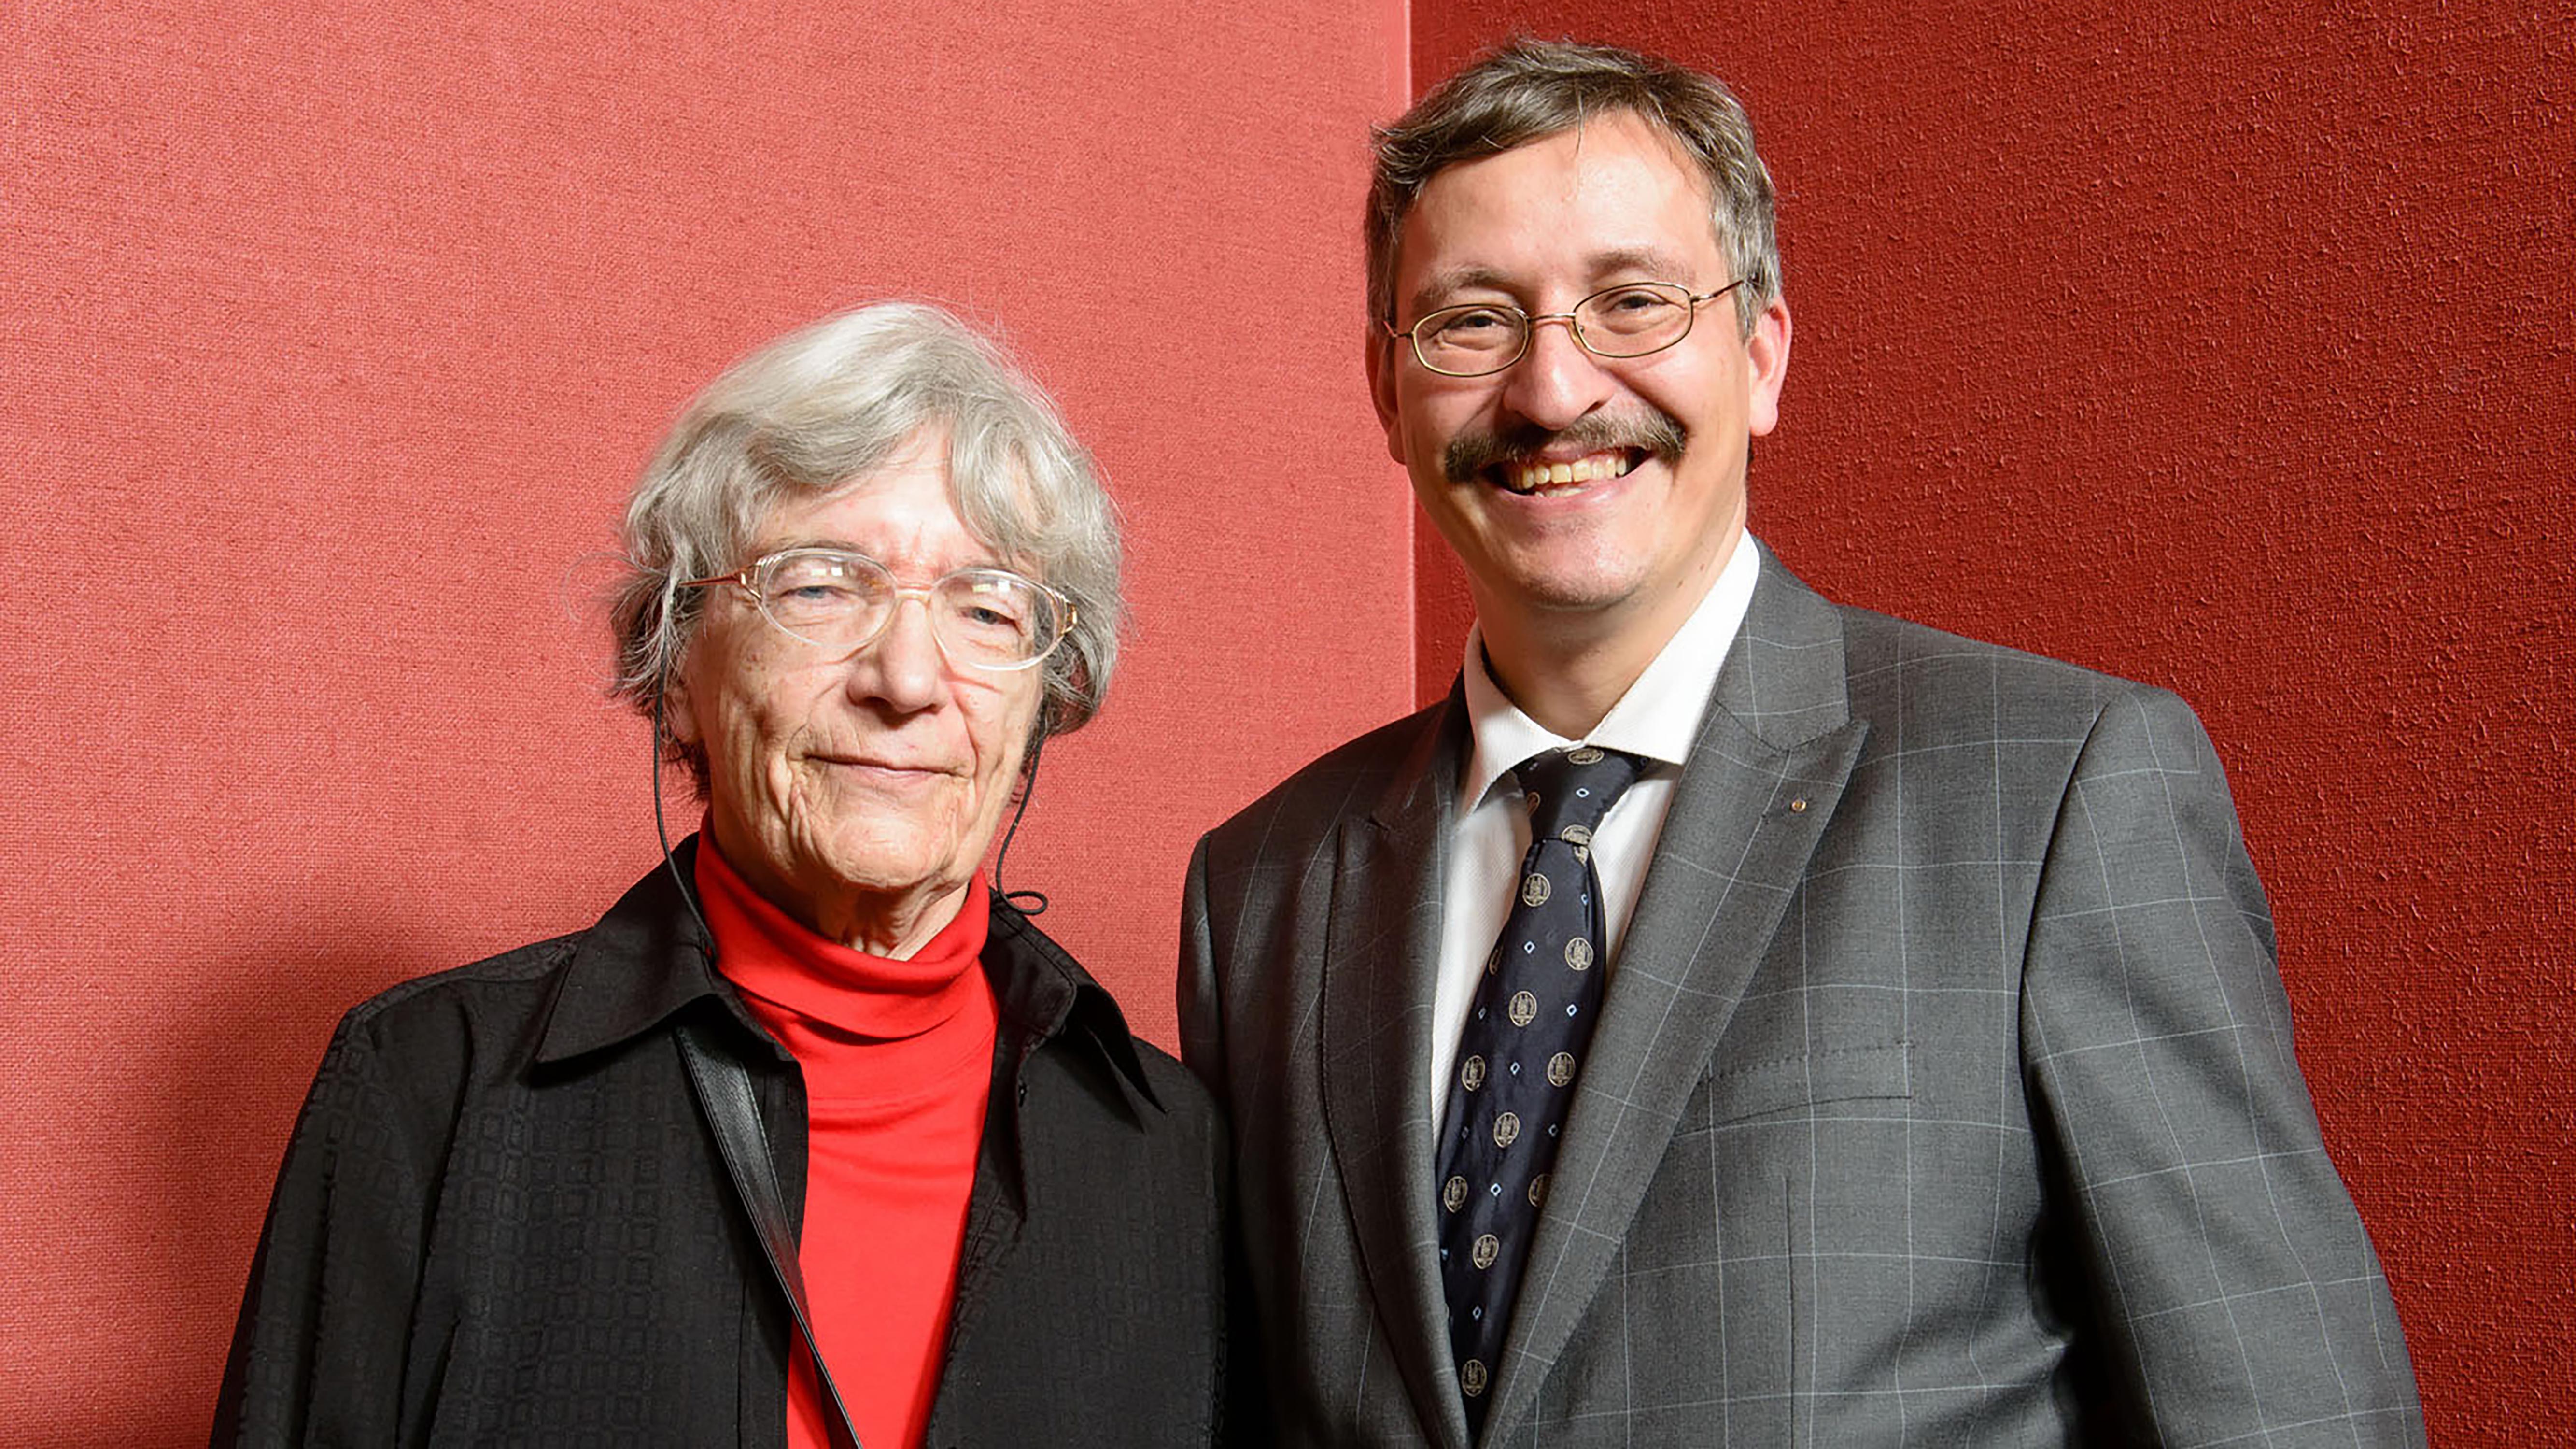 A pioneering predecessor: Physicist Verena Meyer (dec. 2018) was President of UZH from 1982 to 1984. After her, no presidents came from the natural sciences for 30 years – until Michael Hengartner took office. The picture was taken in February 2014 at a reception for female professors in the Uniturm restaurant.